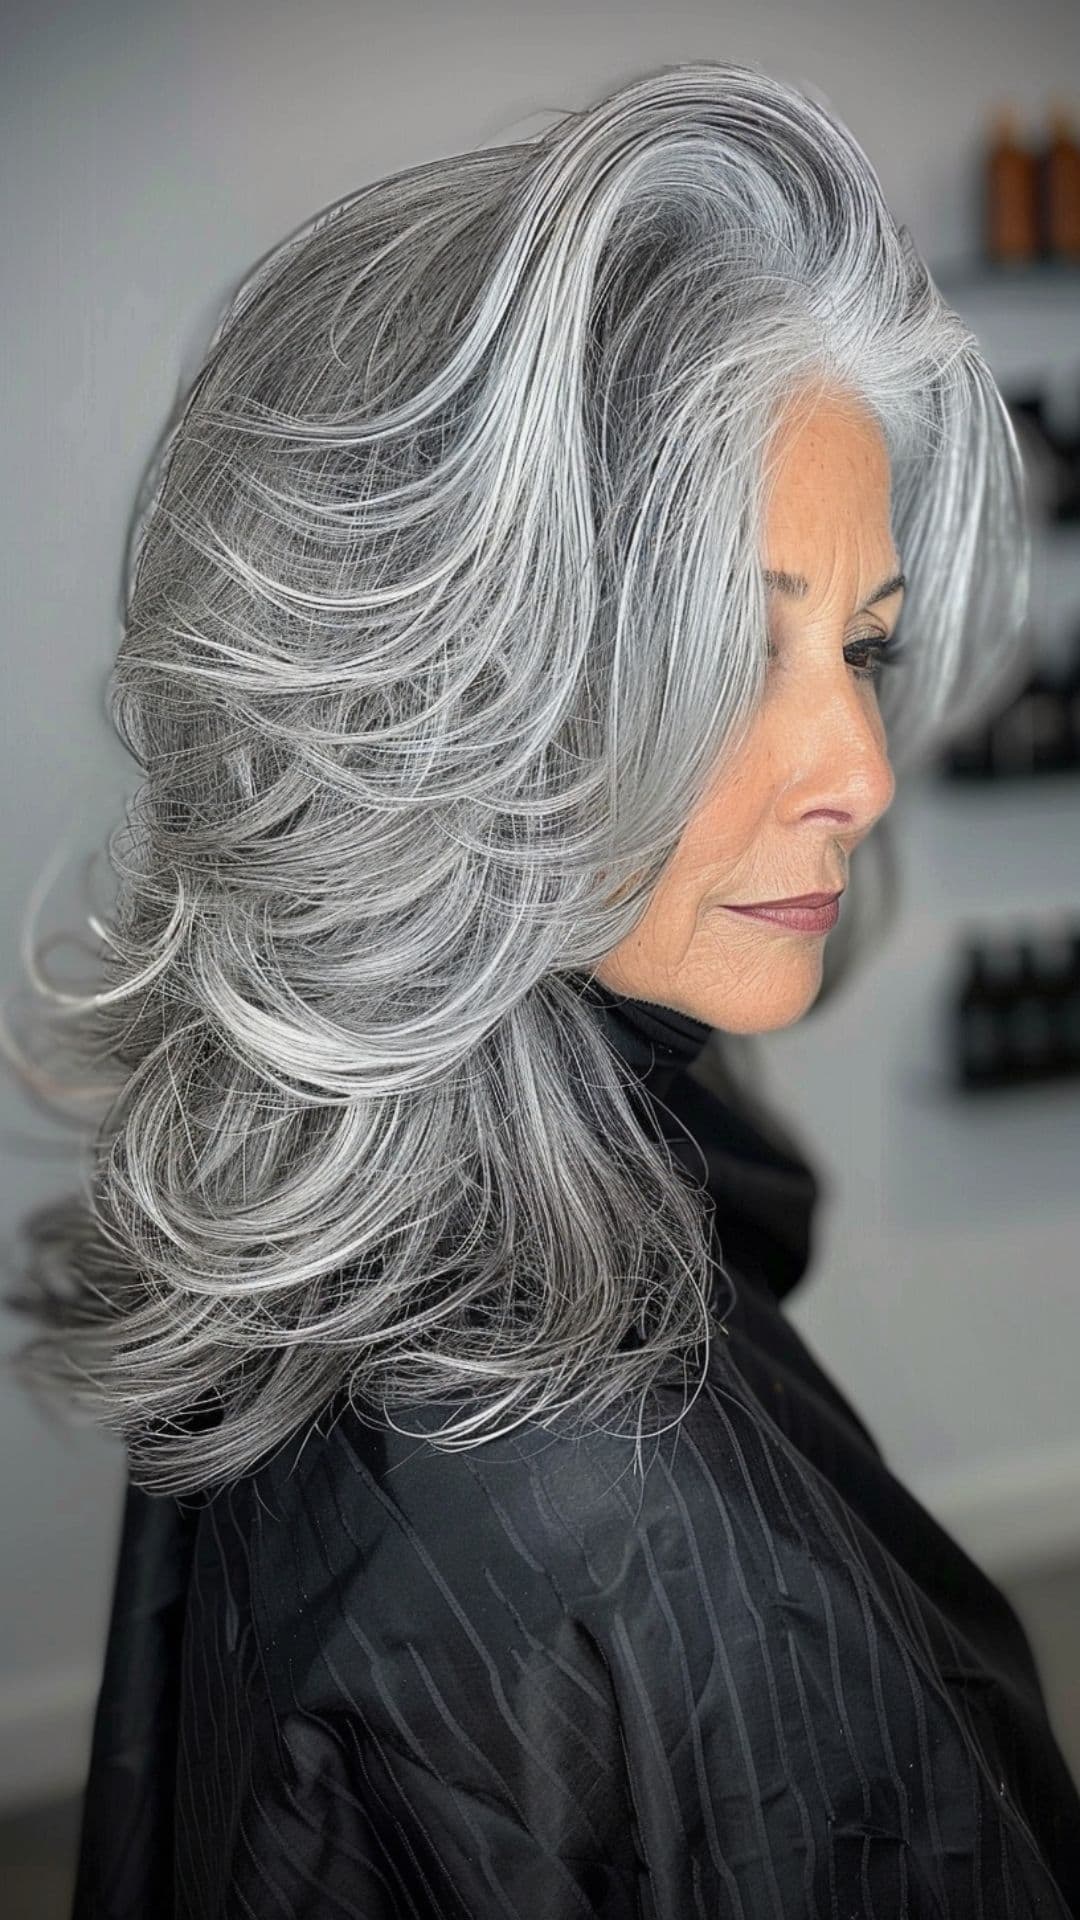 An old woman modelling a salt and pepper hair color.